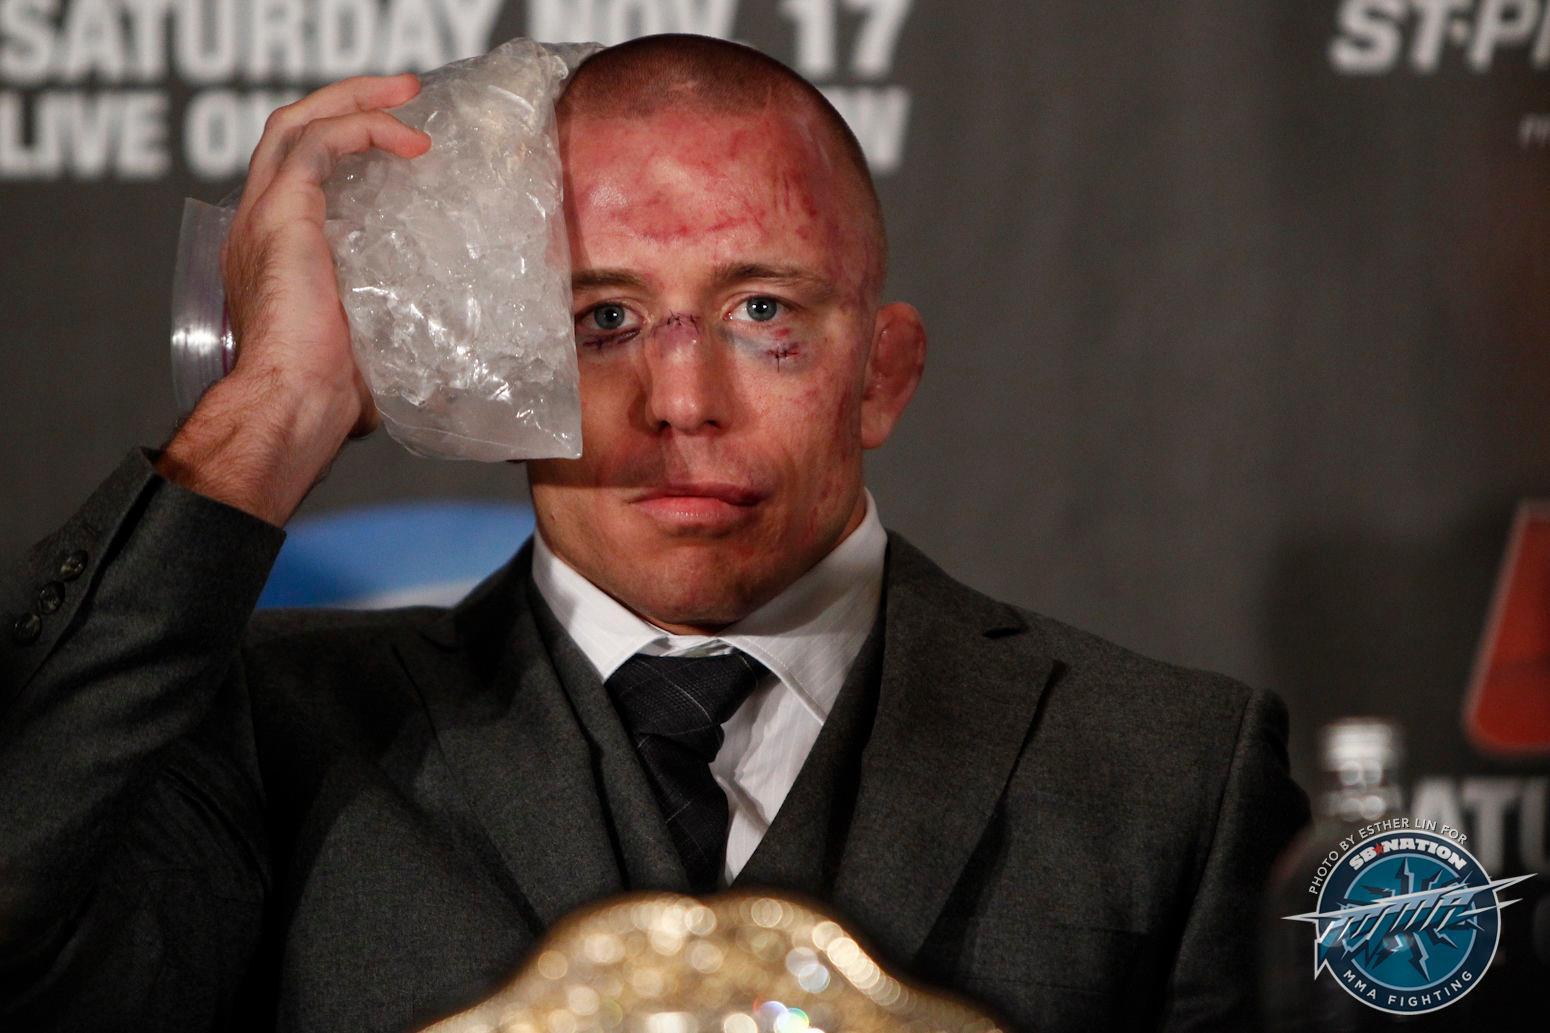 St. Pierre Post fight with Condit at Press Conference Swollen head